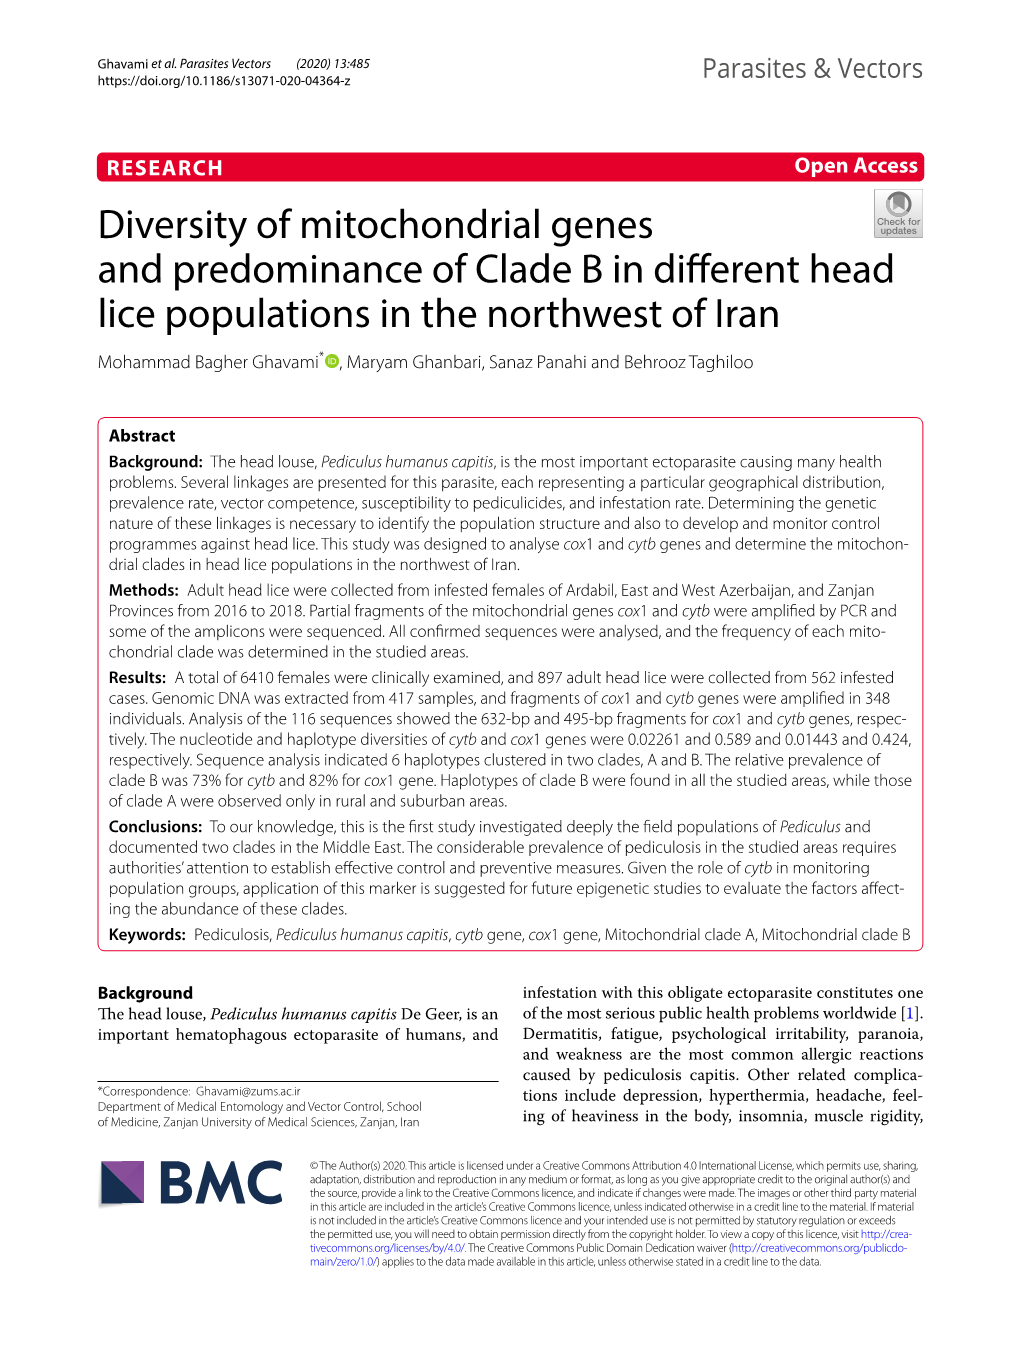 Diversity of Mitochondrial Genes and Predominance of Clade B In